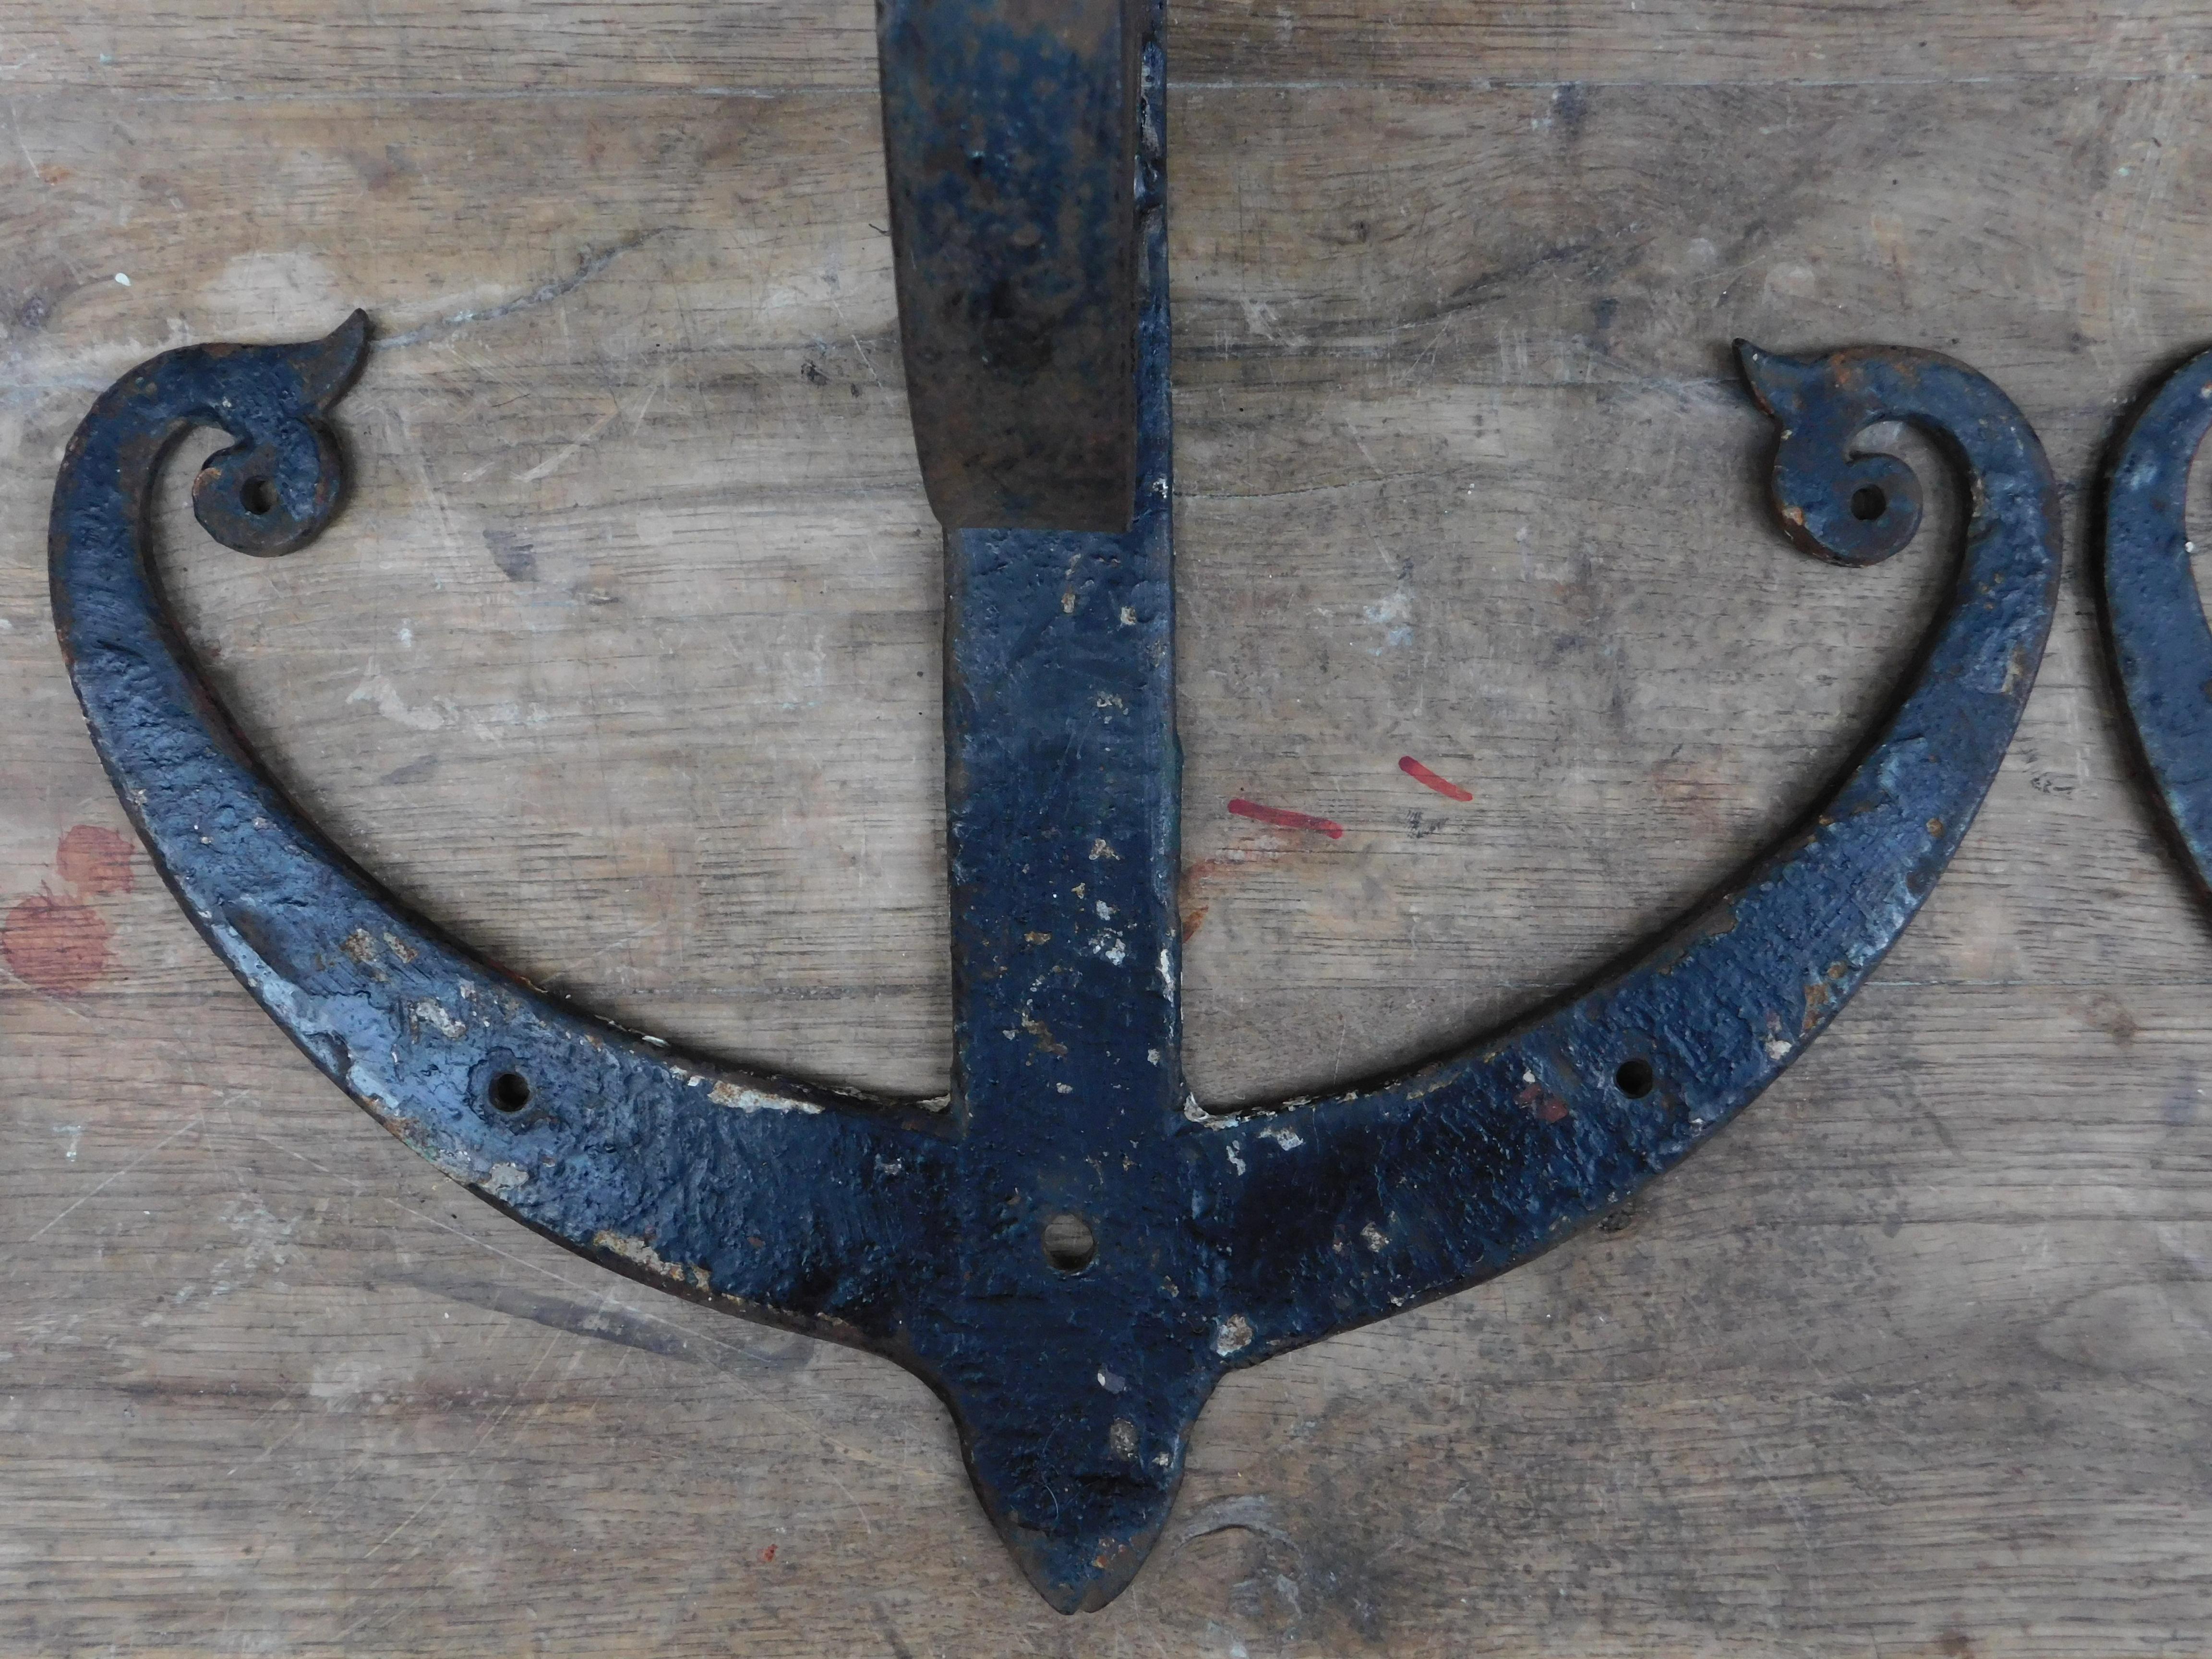 These brackets with a very elegant stylised anchor design come from Zeeland in the Netherlands and were made to hold a wood shelf or planter. In Zeeland the economy is based on the fishing and ship making industries and the colourful old houses are